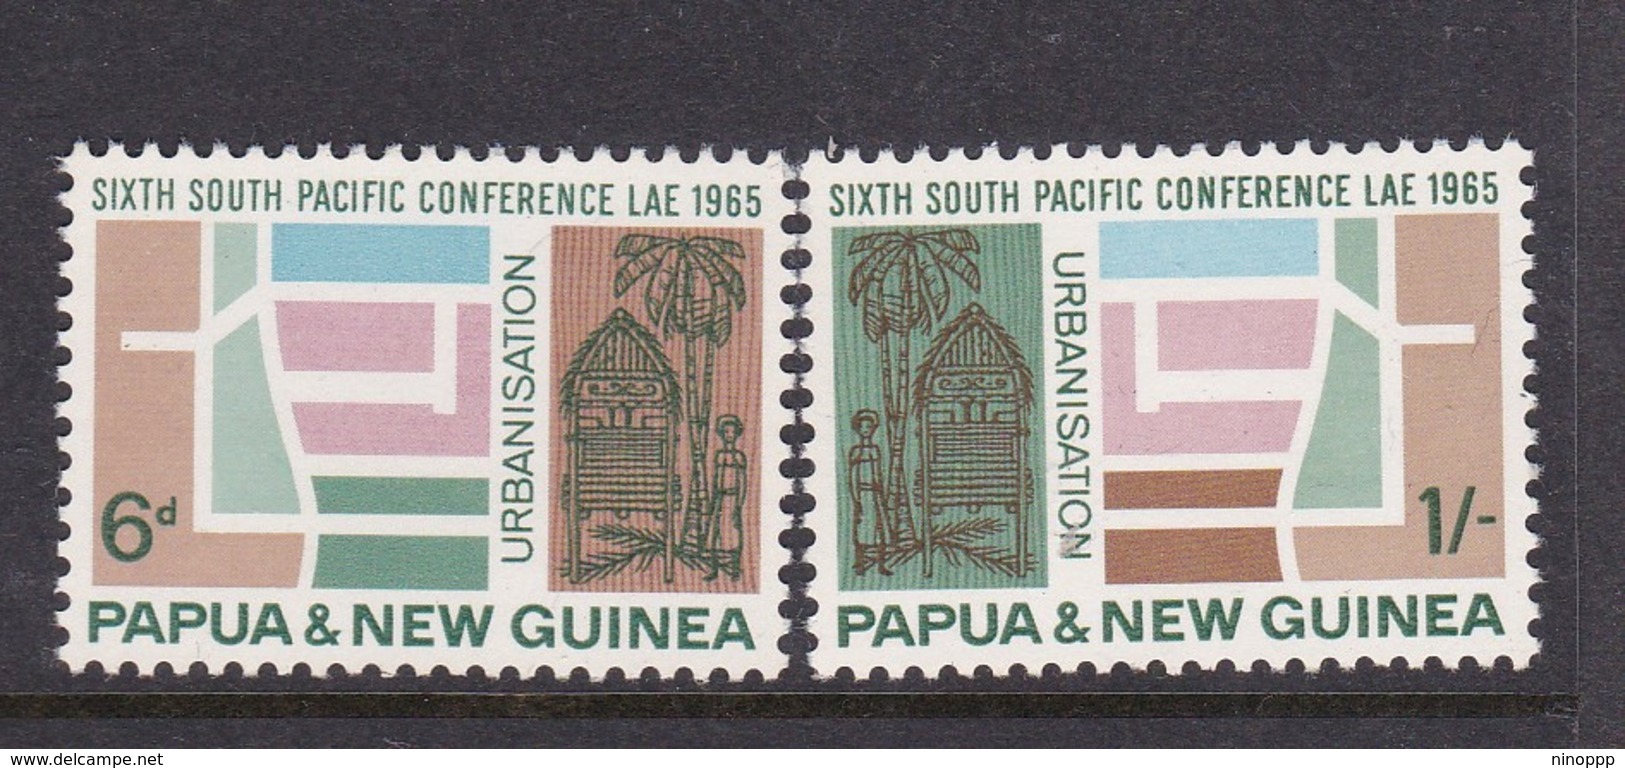 Papua New Guinea SG 77-78 1965 6th South Pacific Conference Mint Never Hinged Set - Papua New Guinea